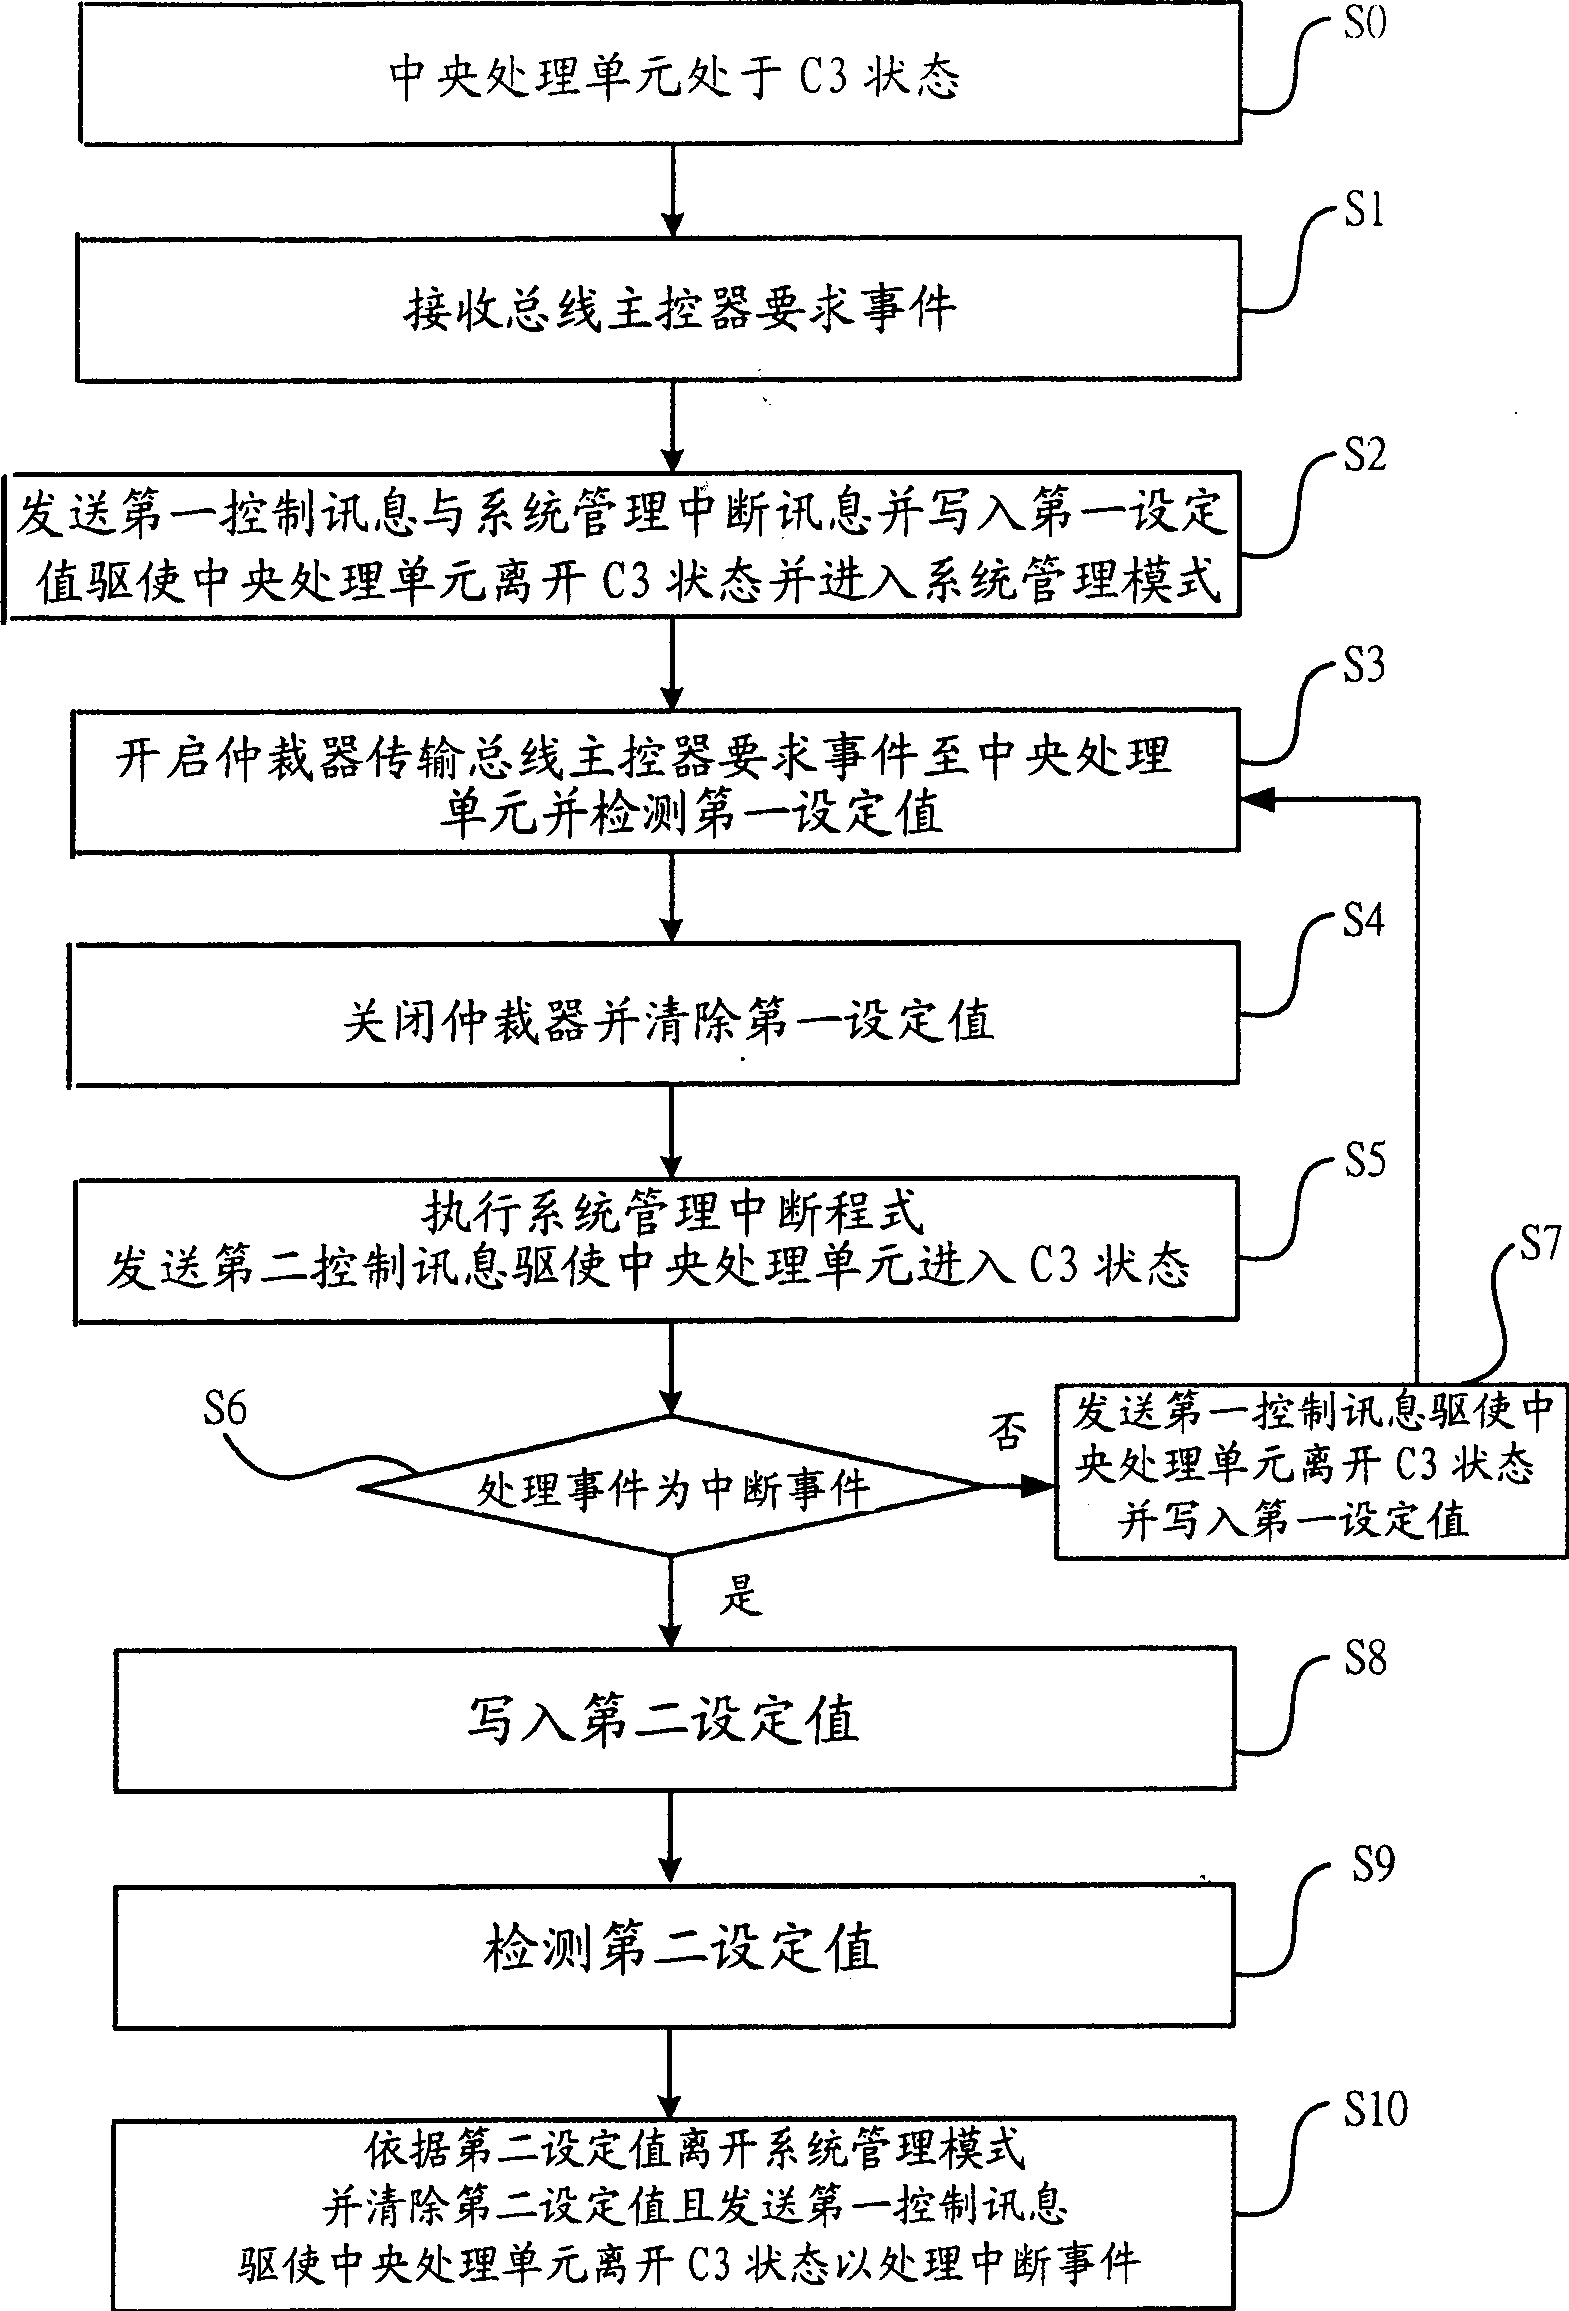 Power-supply saving method and system for central processing unit